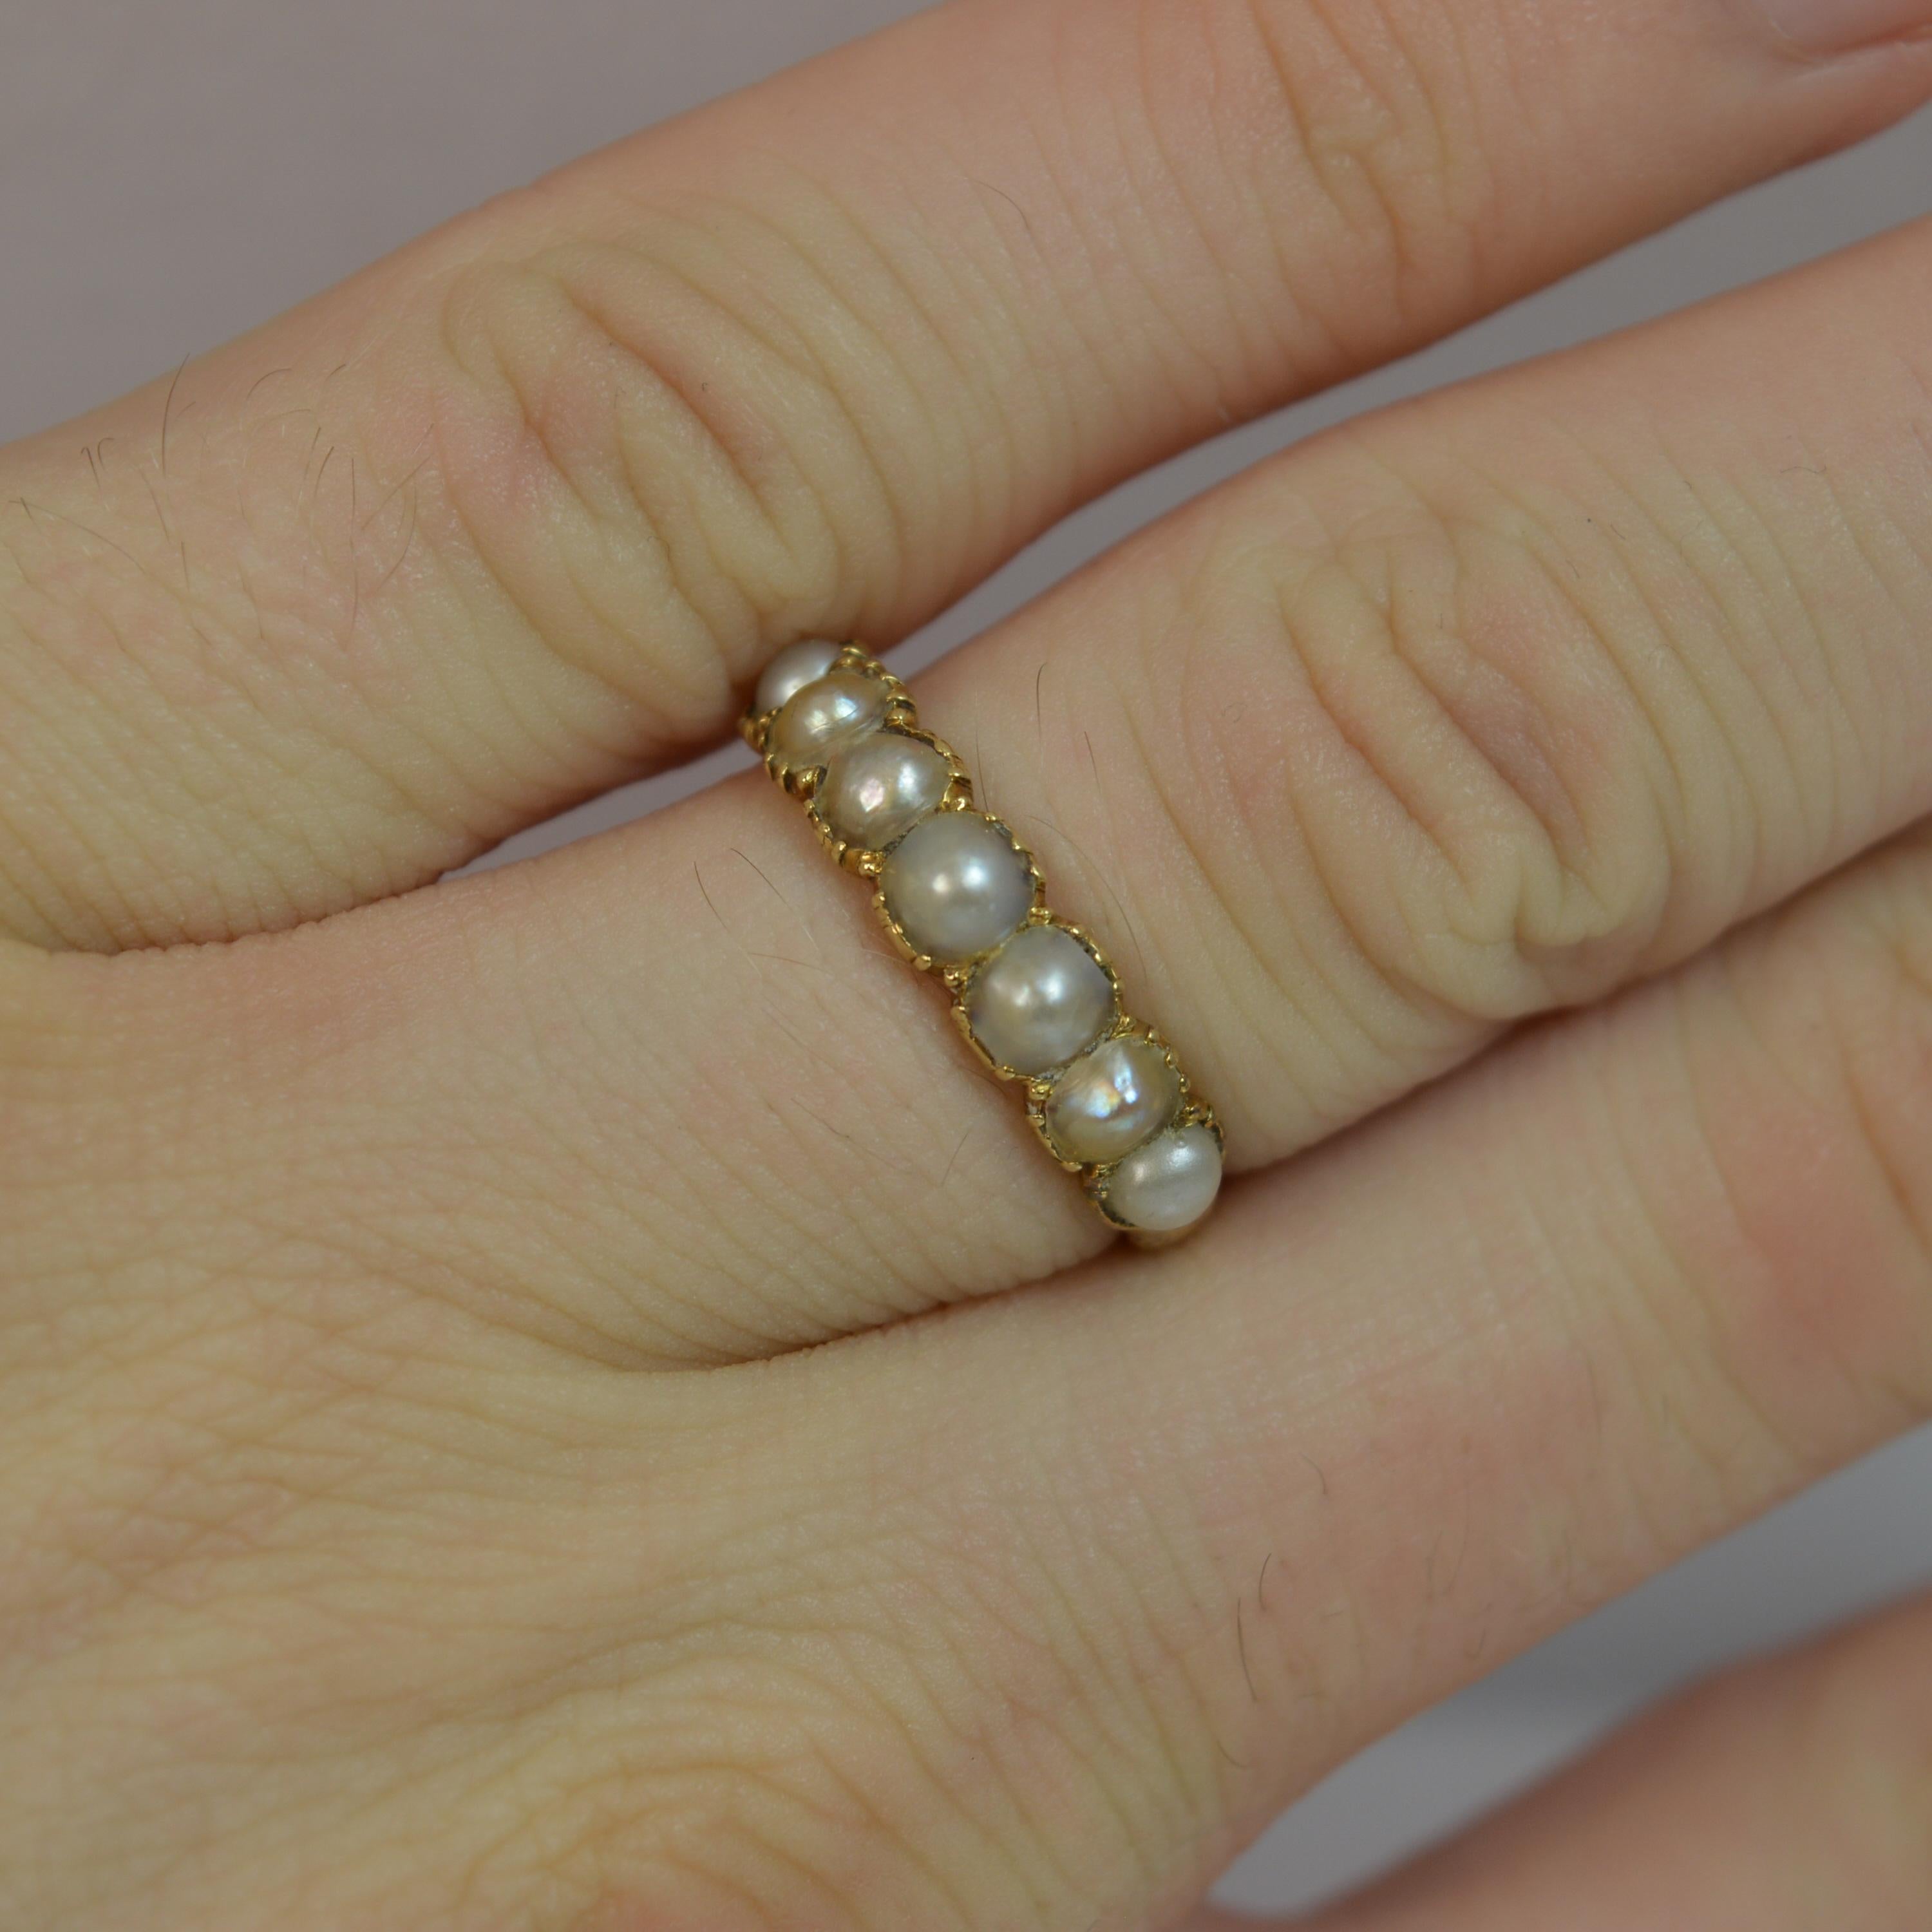 

A Georgian period ladies seven pearl ring. Solid 15ct gold shank. Stylish and elegant piece. Set with natural pearls to form a single row half eternity ring, ideal for stacking. 120m spread of stones, 4.5mm thick band to the front. c1770's. Fine